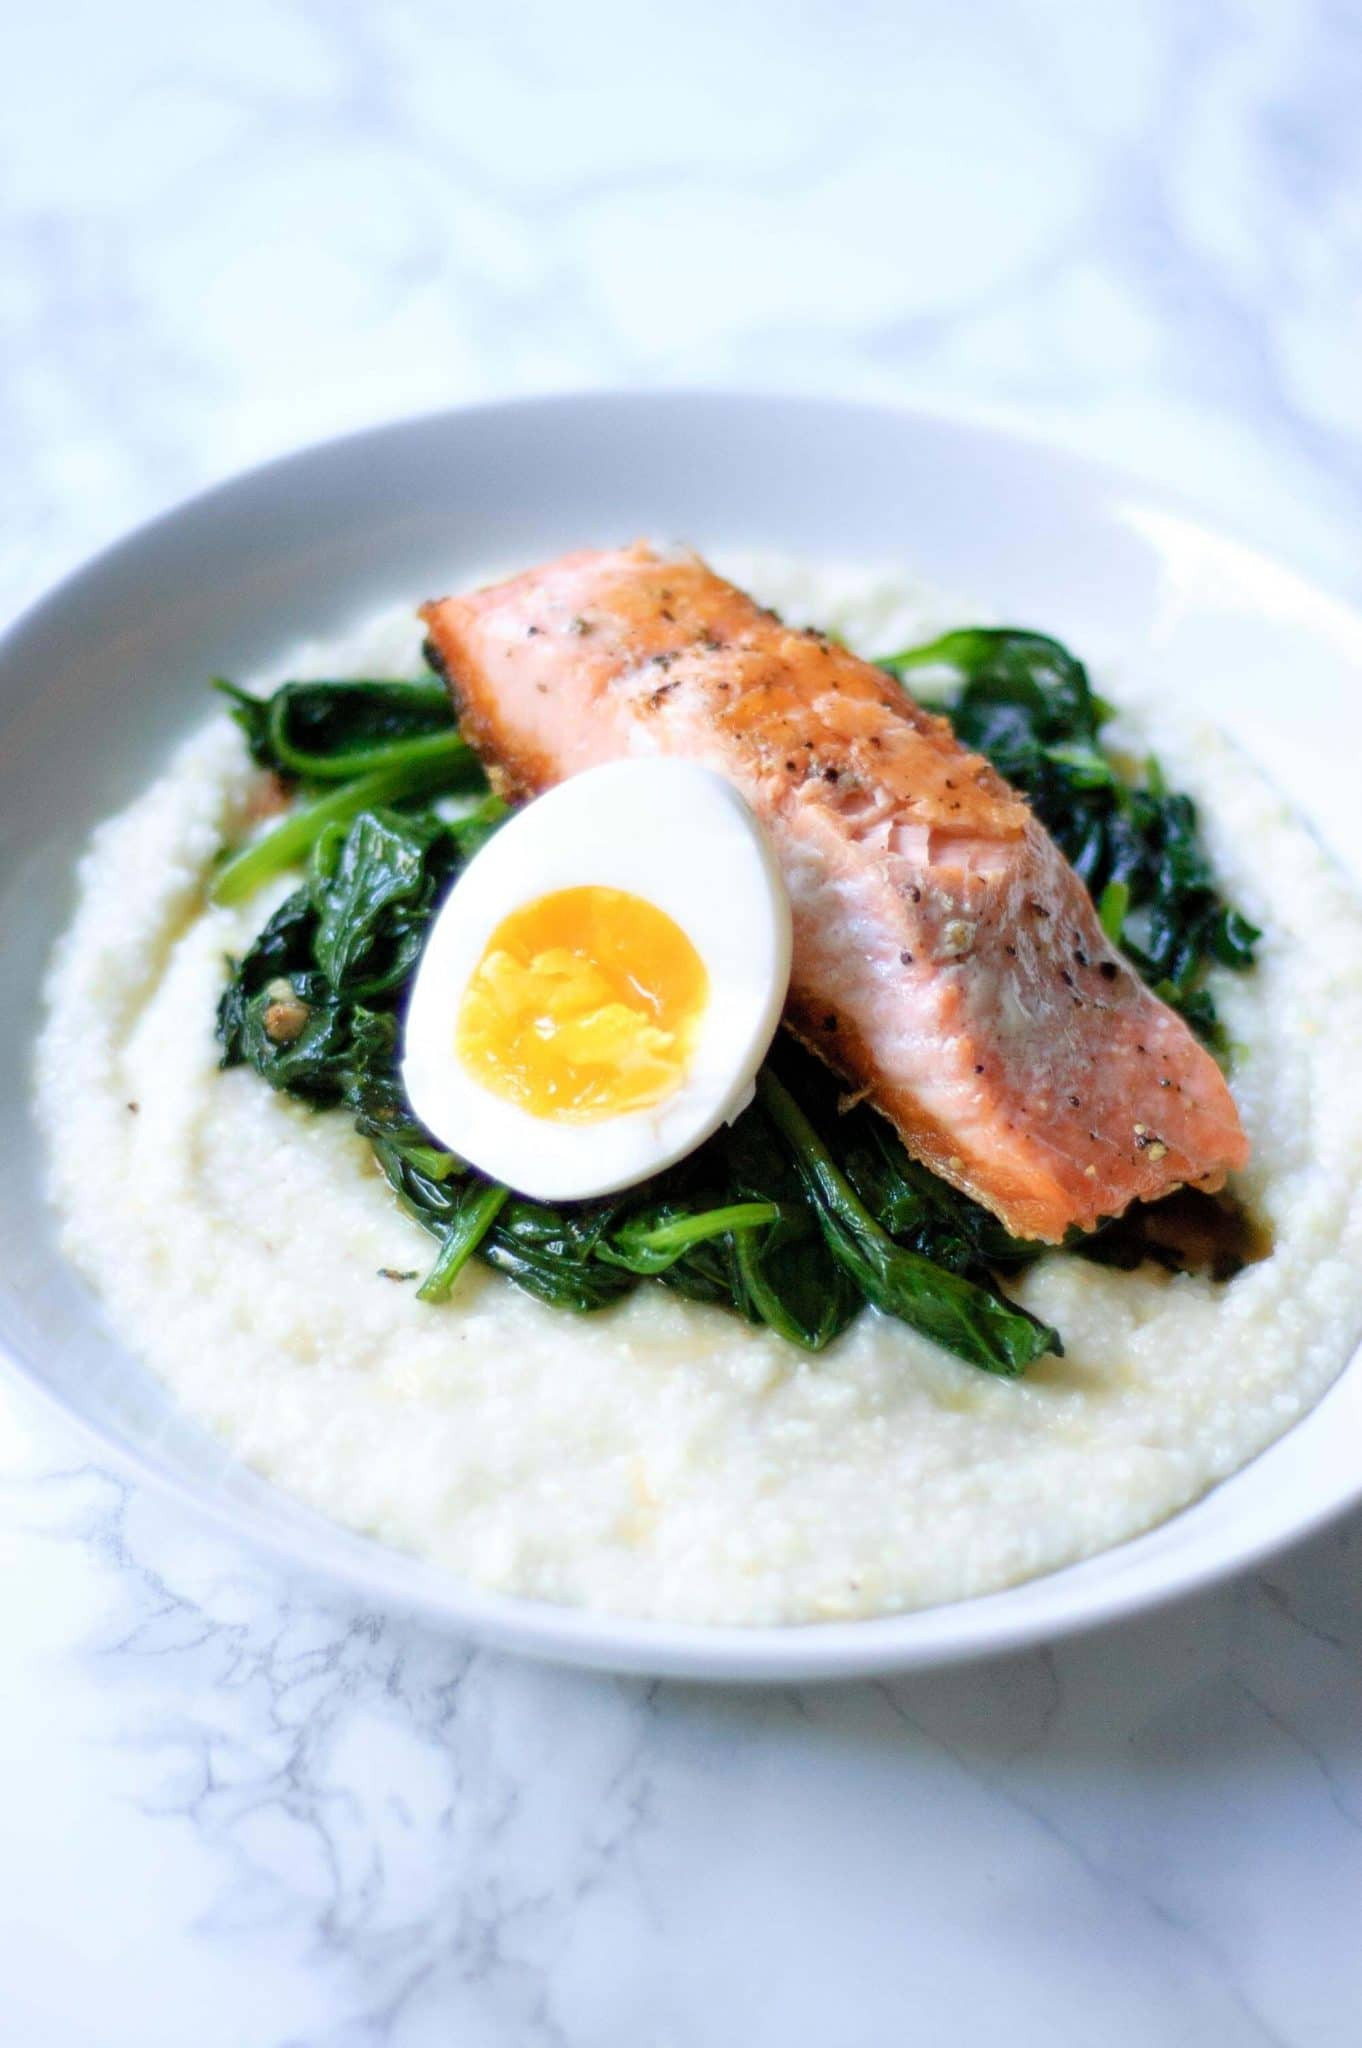 Salmon For Breakfast With Eggs
 Salmon and Grits with Garlicky Greens & Boiled Eggs